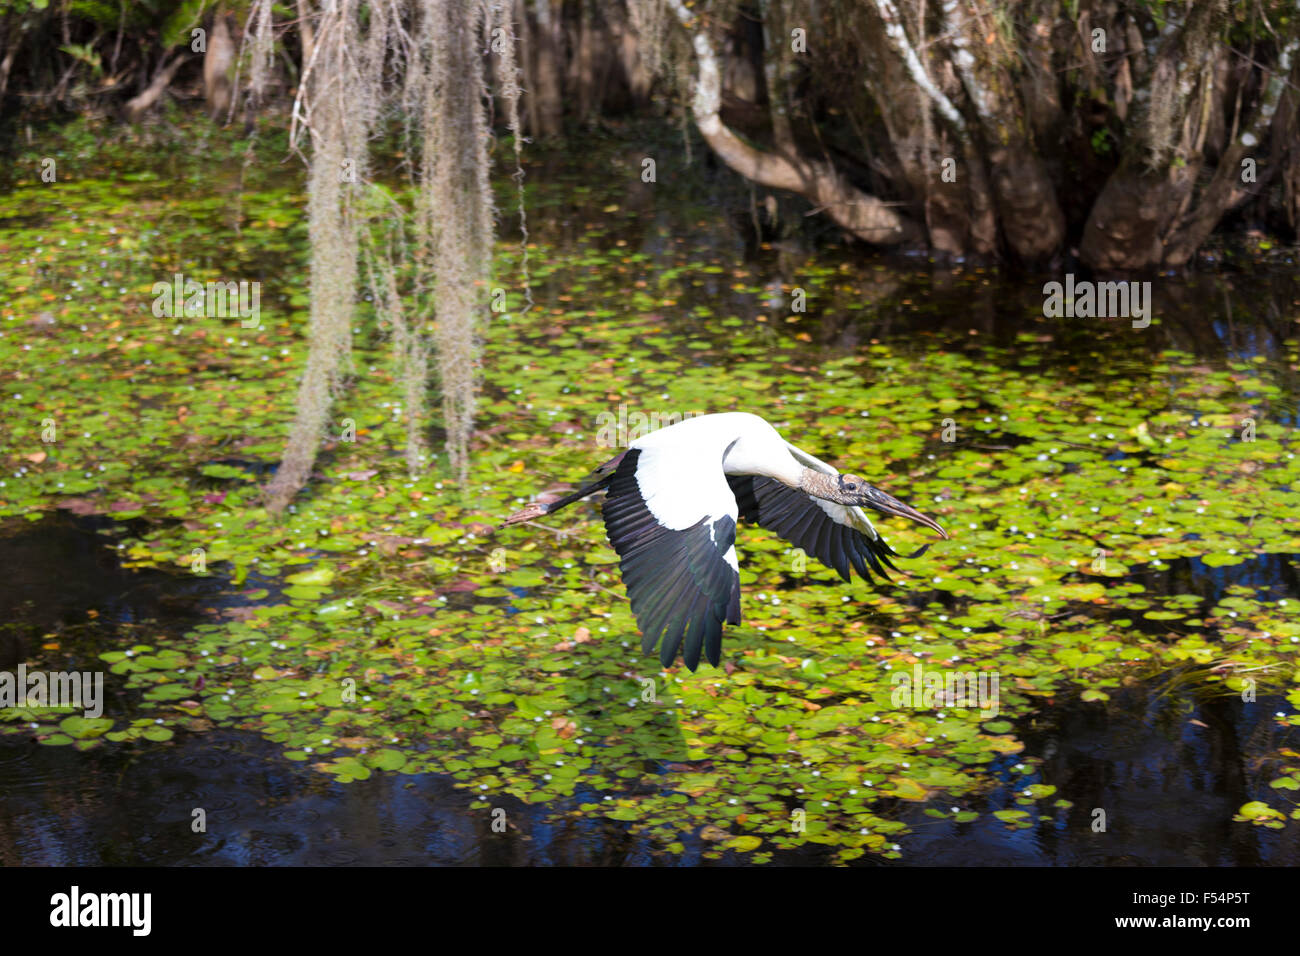 Endangered species Wood Stork, Mycteria americana, with wide wingspan in flight in swamp in the Florida Everglades, USA Stock Photo